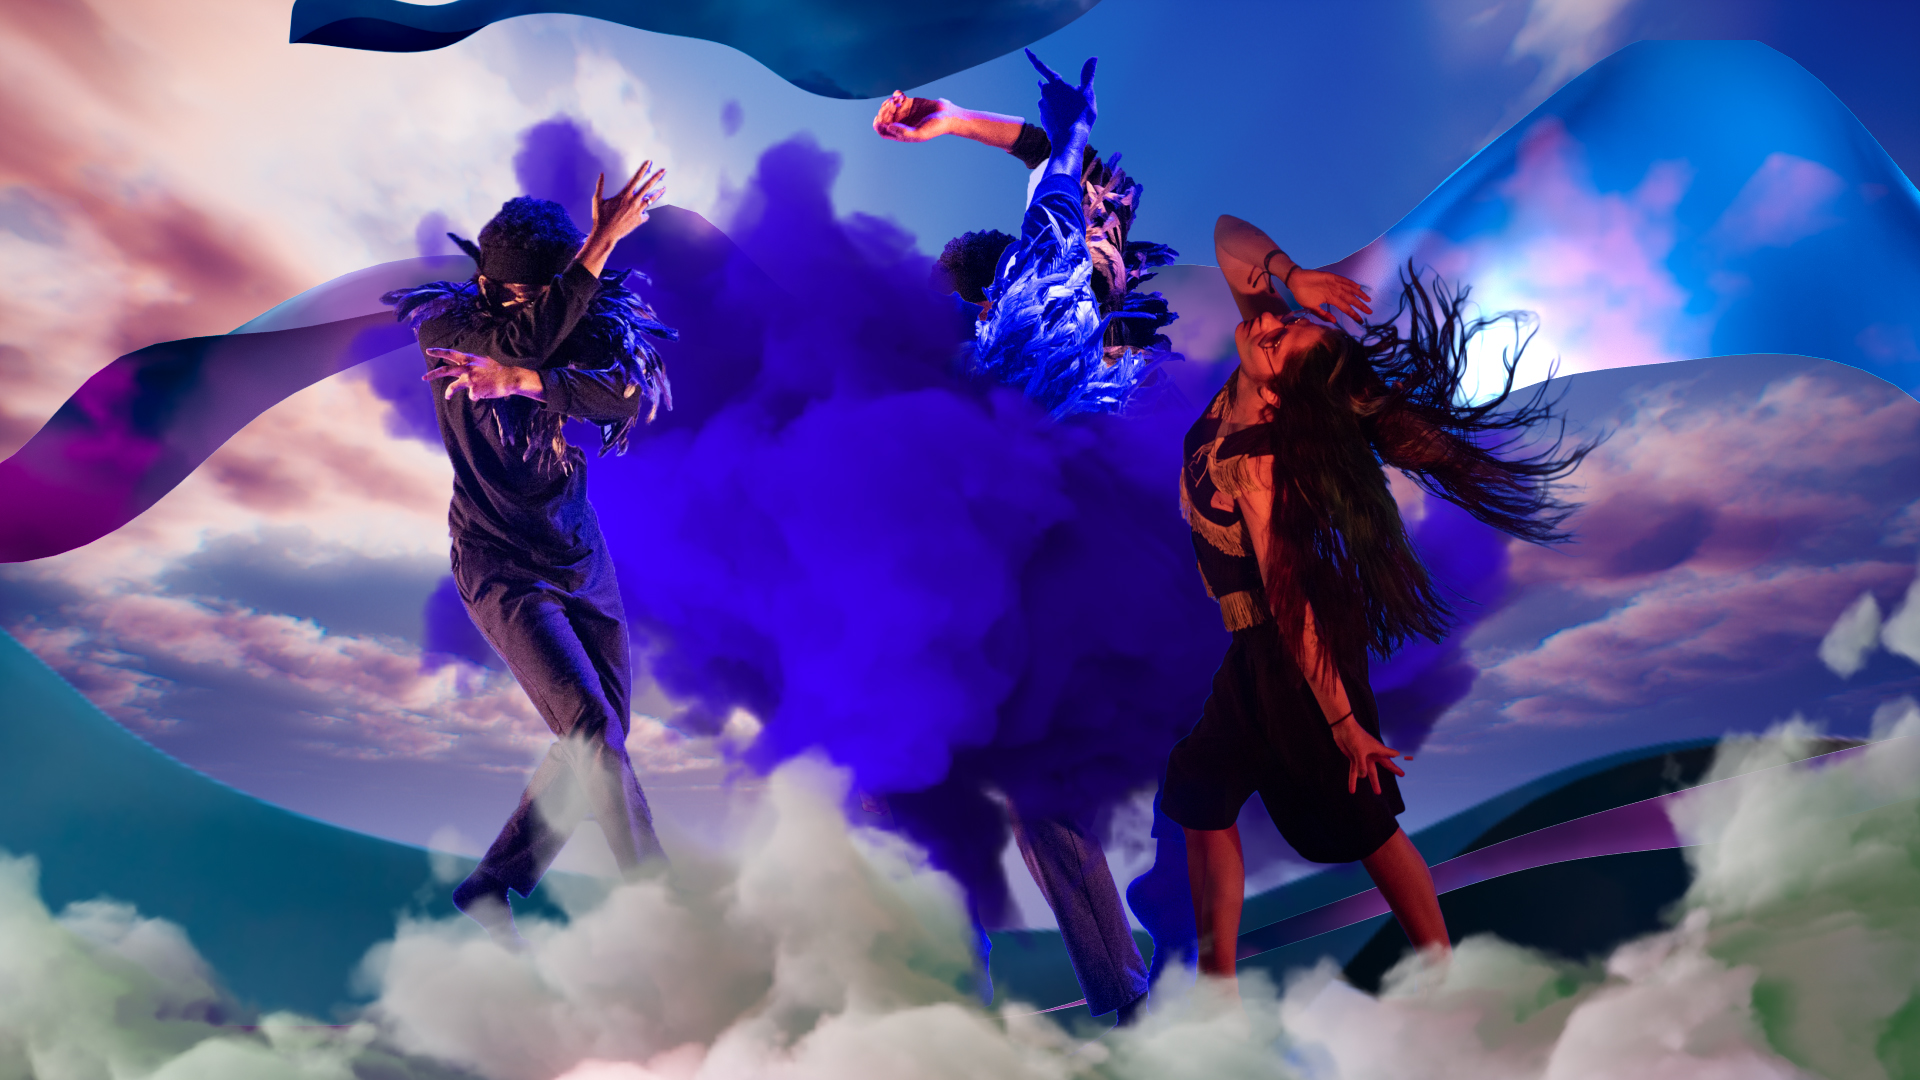 A digital collage with fluffy clouds in the background. There are a few cut-outs of dancers in the centre with a cloud of deep purple smoke filling the space between them.